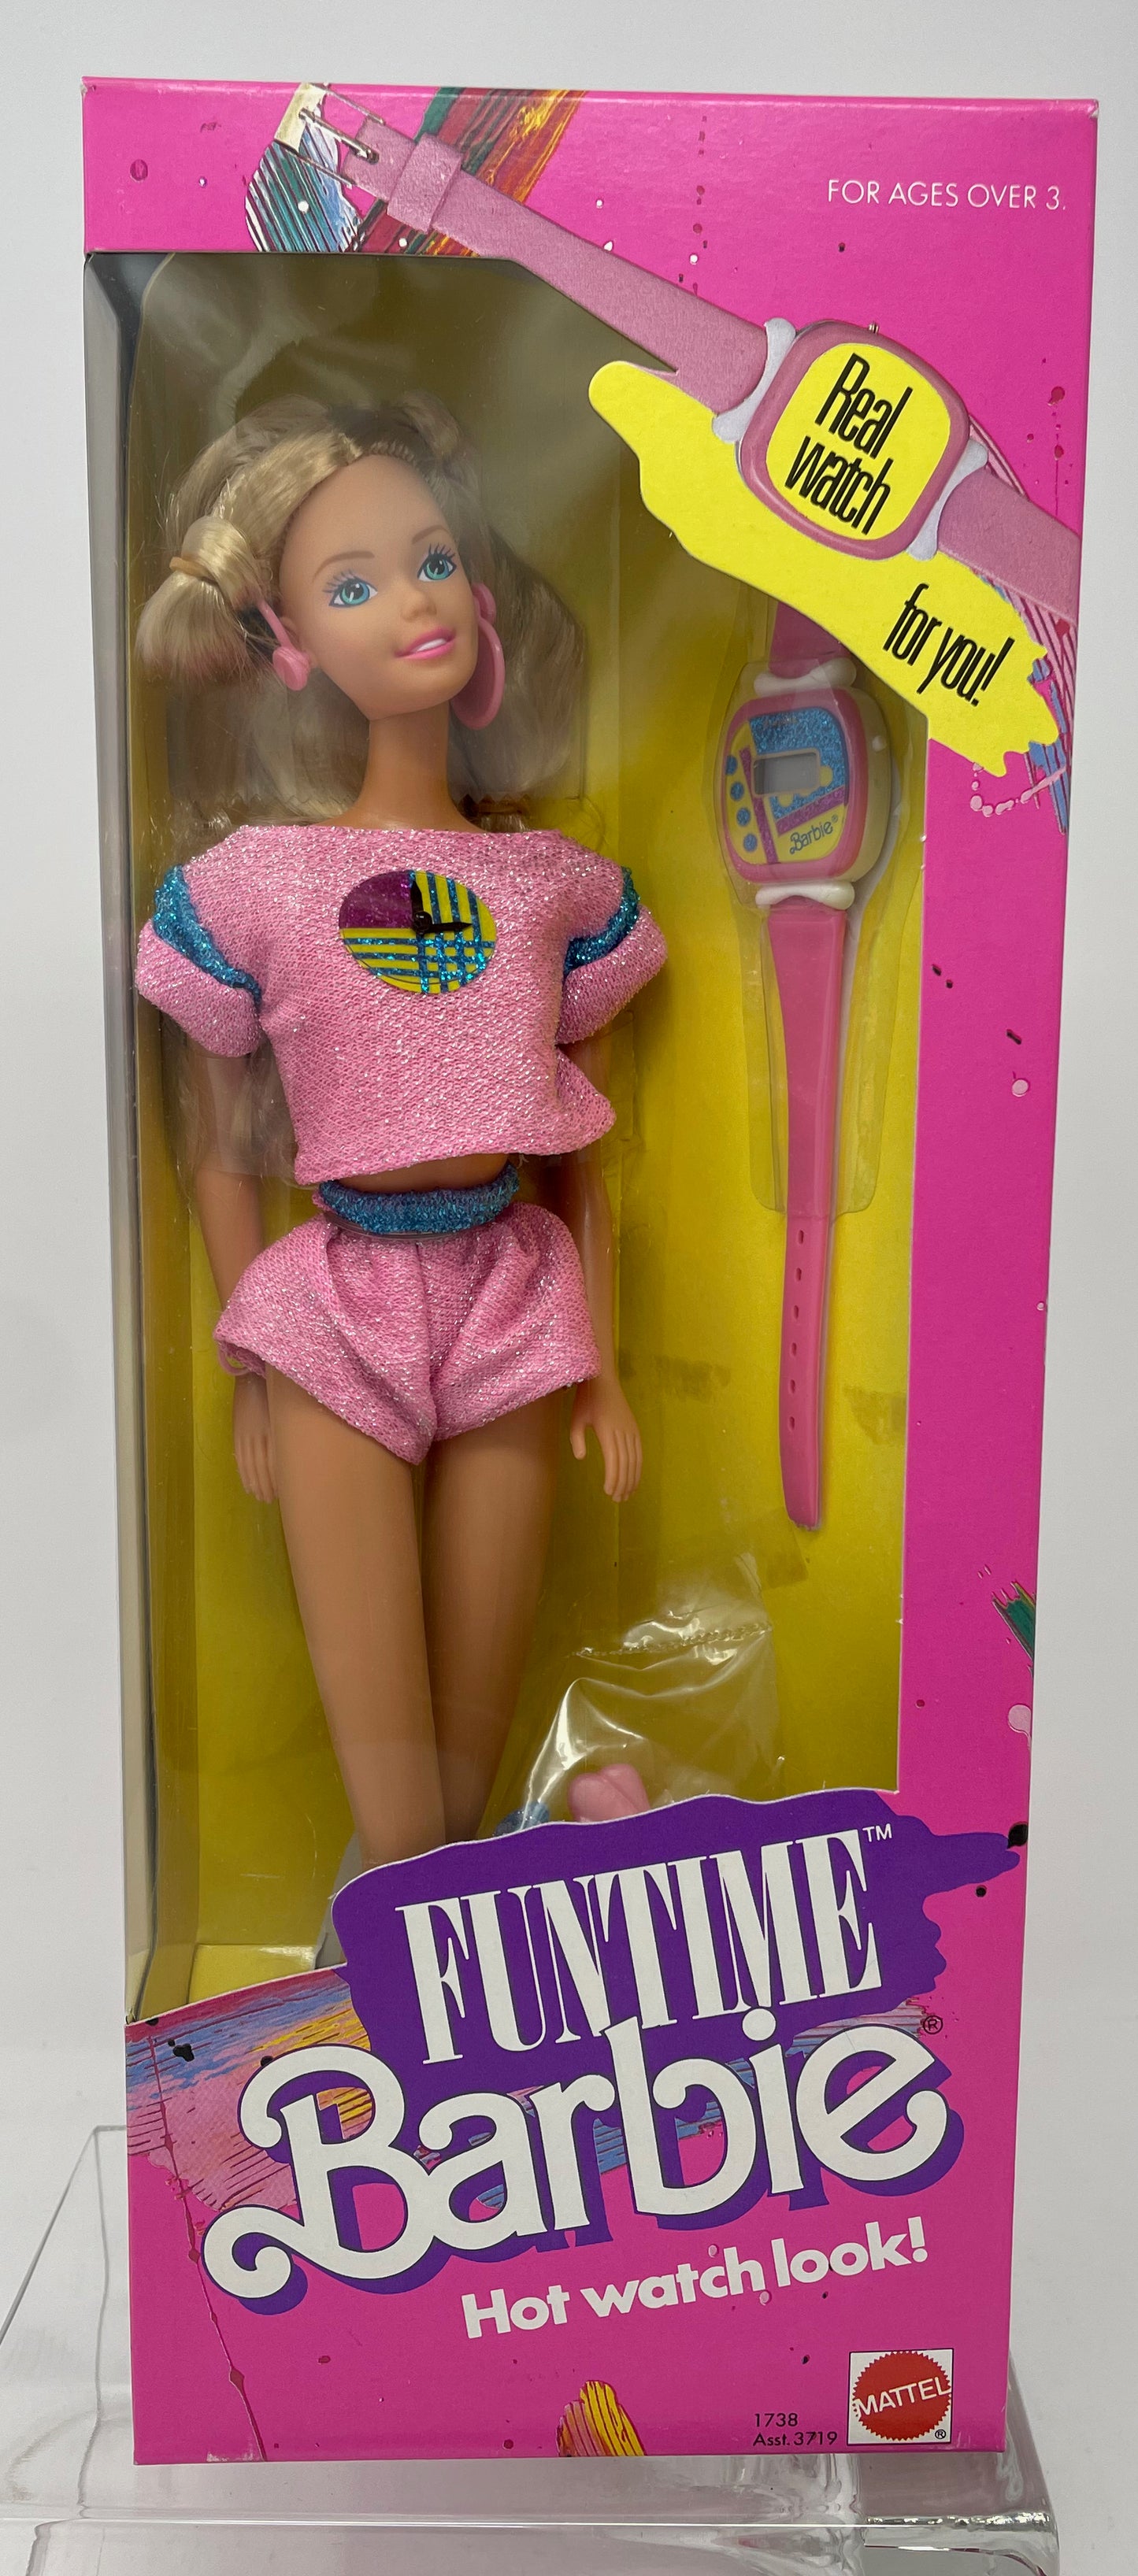 FUNTIME BARBIE - BARBIE DOLL - PINK OUTFIT AND WATCH - #1738 - MATTEL 1986